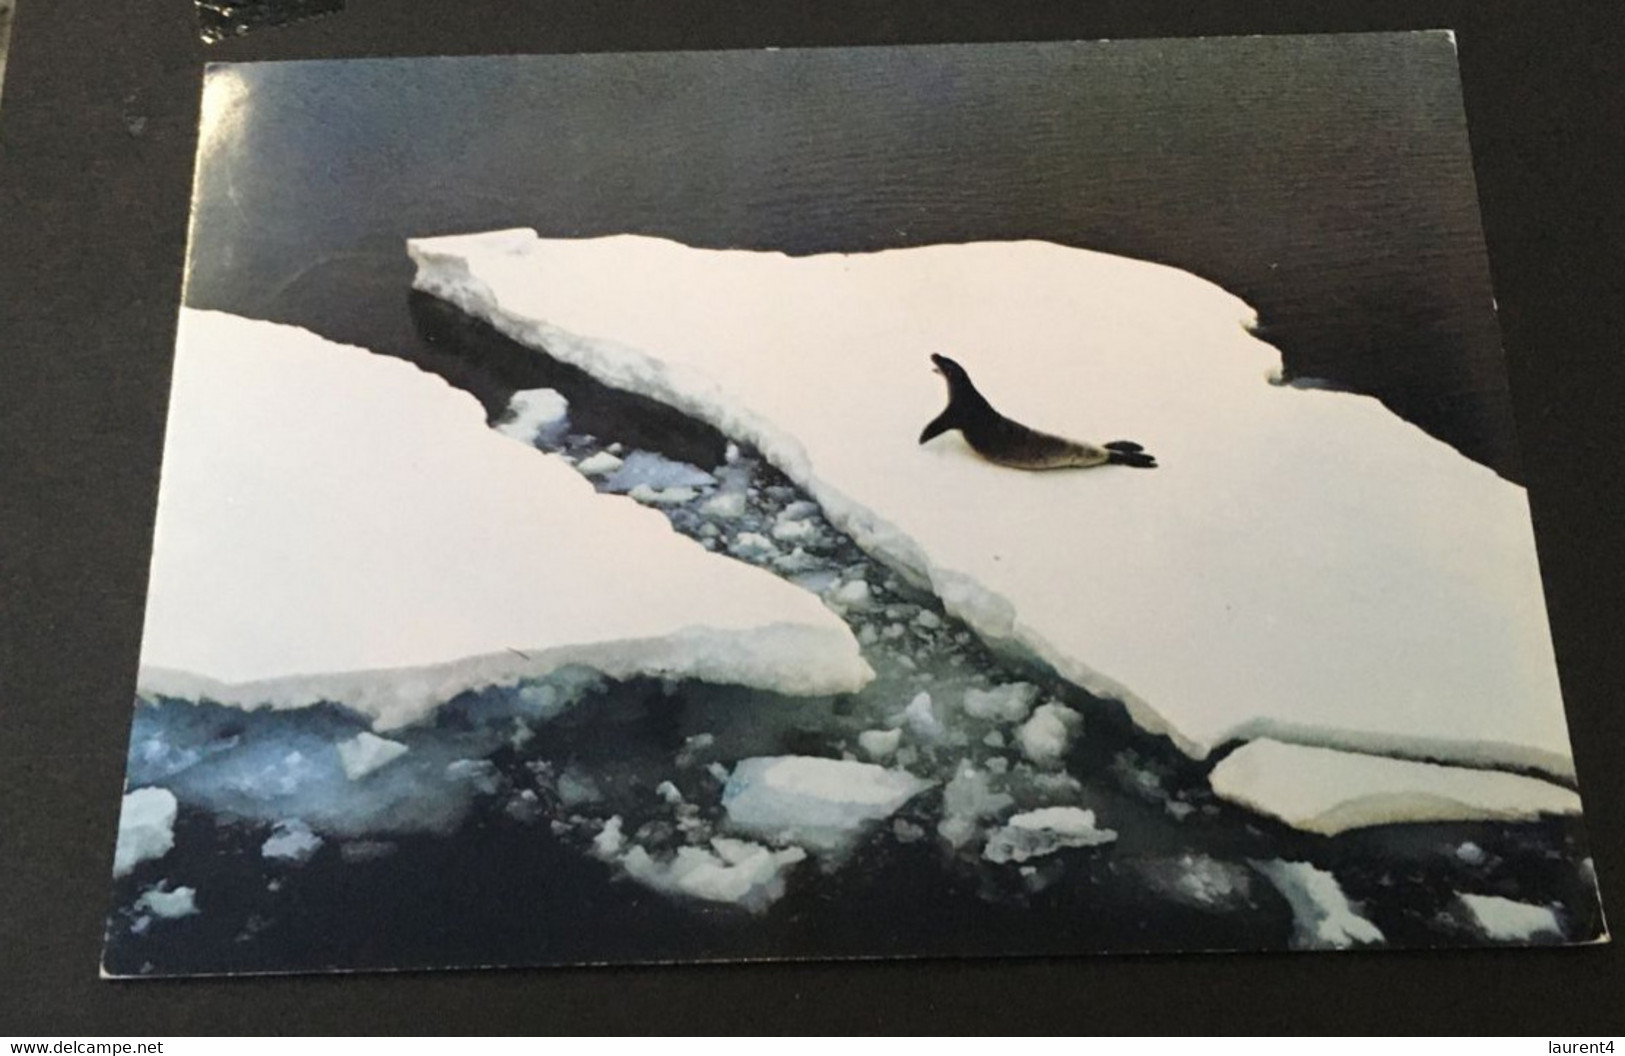 (1 B 31 A)  British Antartcic Terrirory - Posted To Australia 1983 From SIGNY - Crabeater Seal - Gebruikt